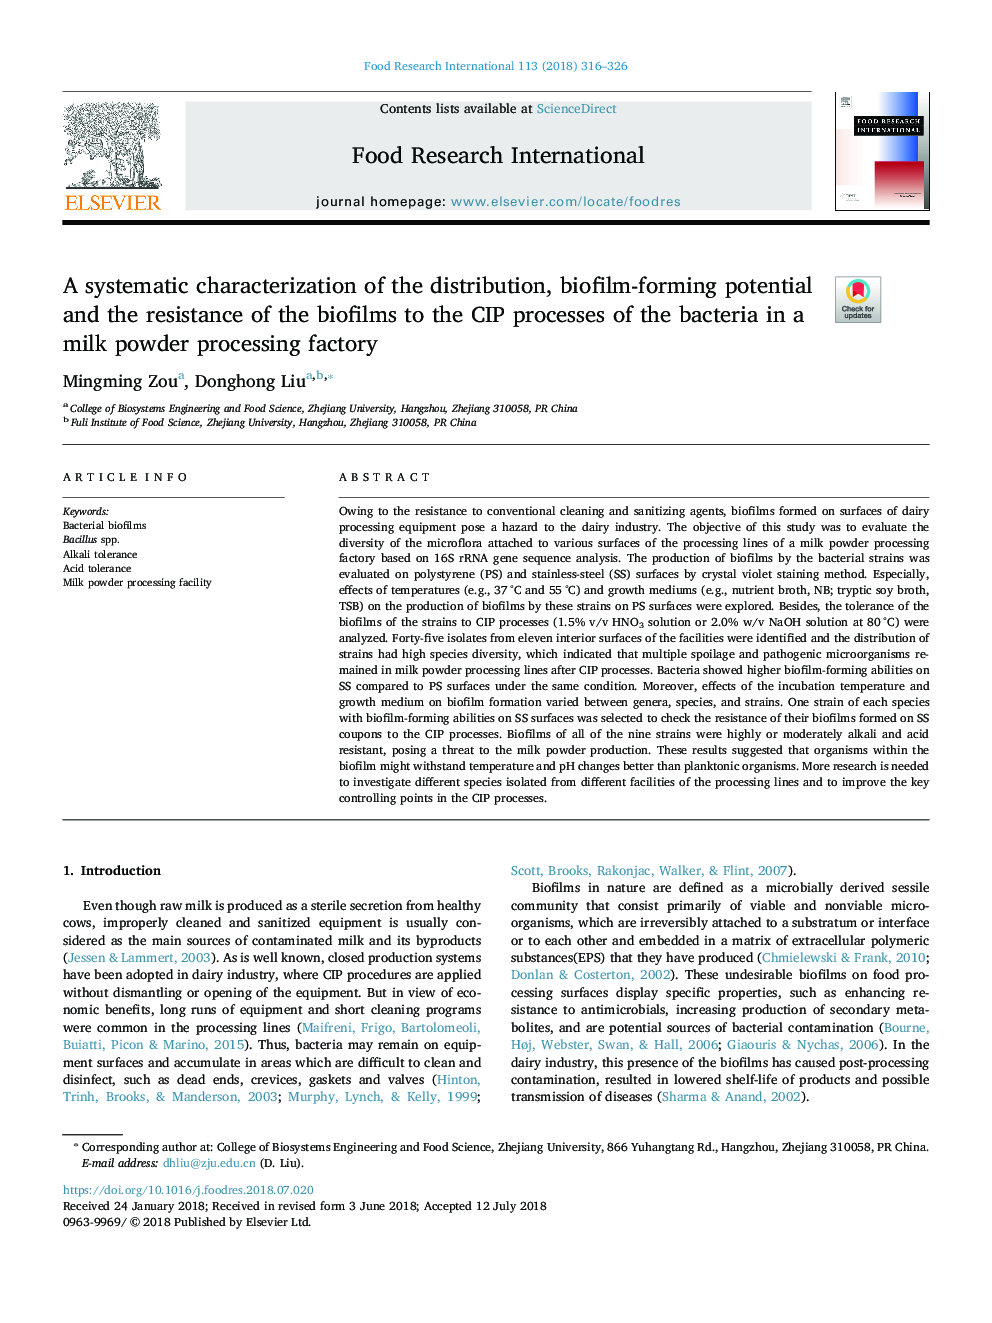 A systematic characterization of the distribution, biofilm-forming potential and the resistance of the biofilms to the CIP processes of the bacteria in a milk powder processing factory